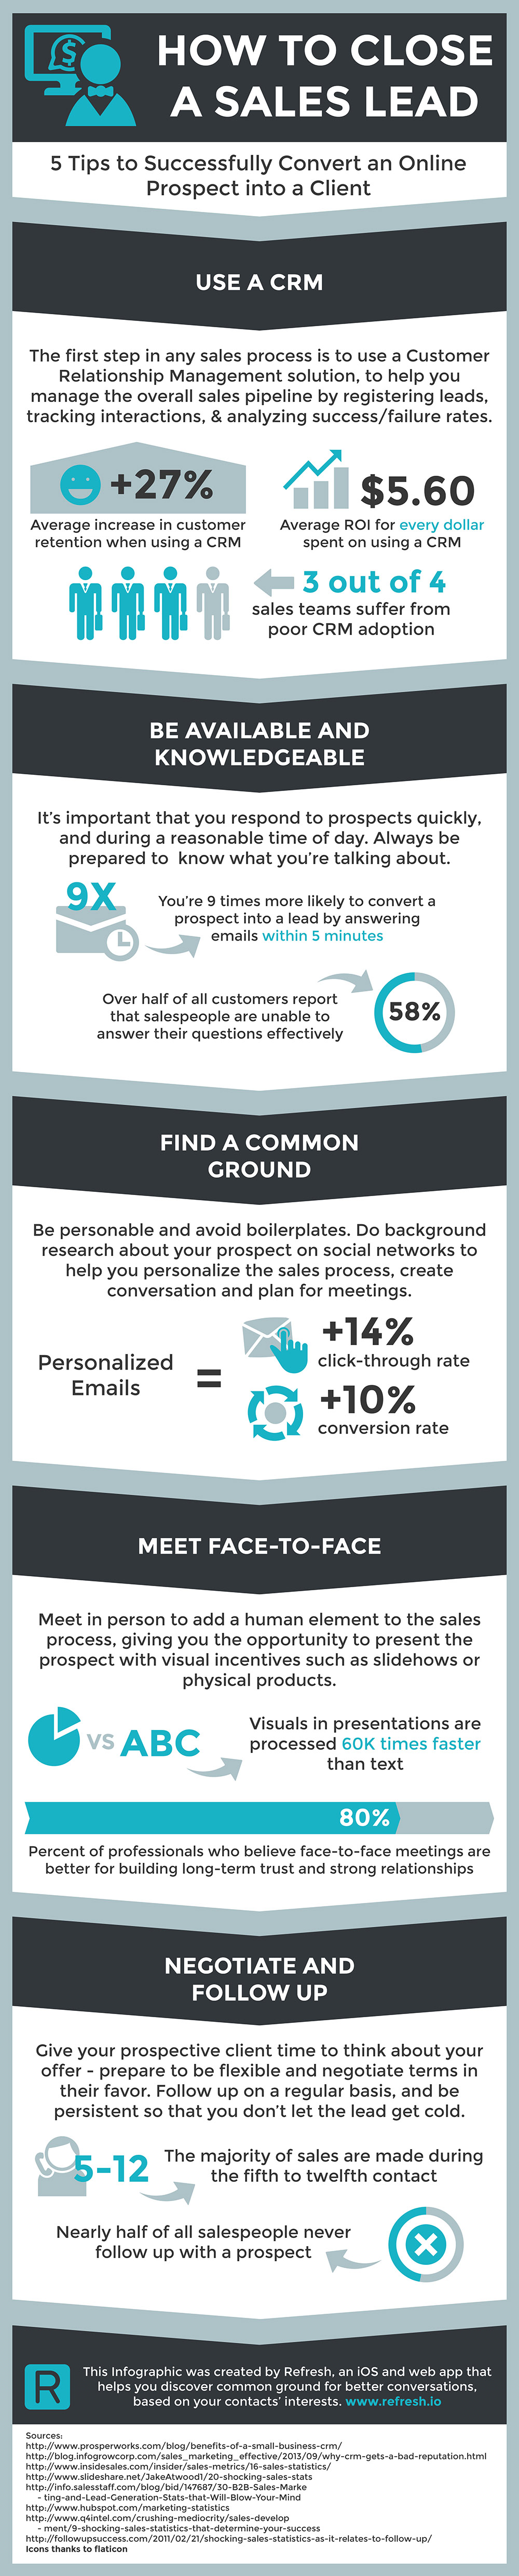 howtoclosesaleslead-infographic_m.jpg